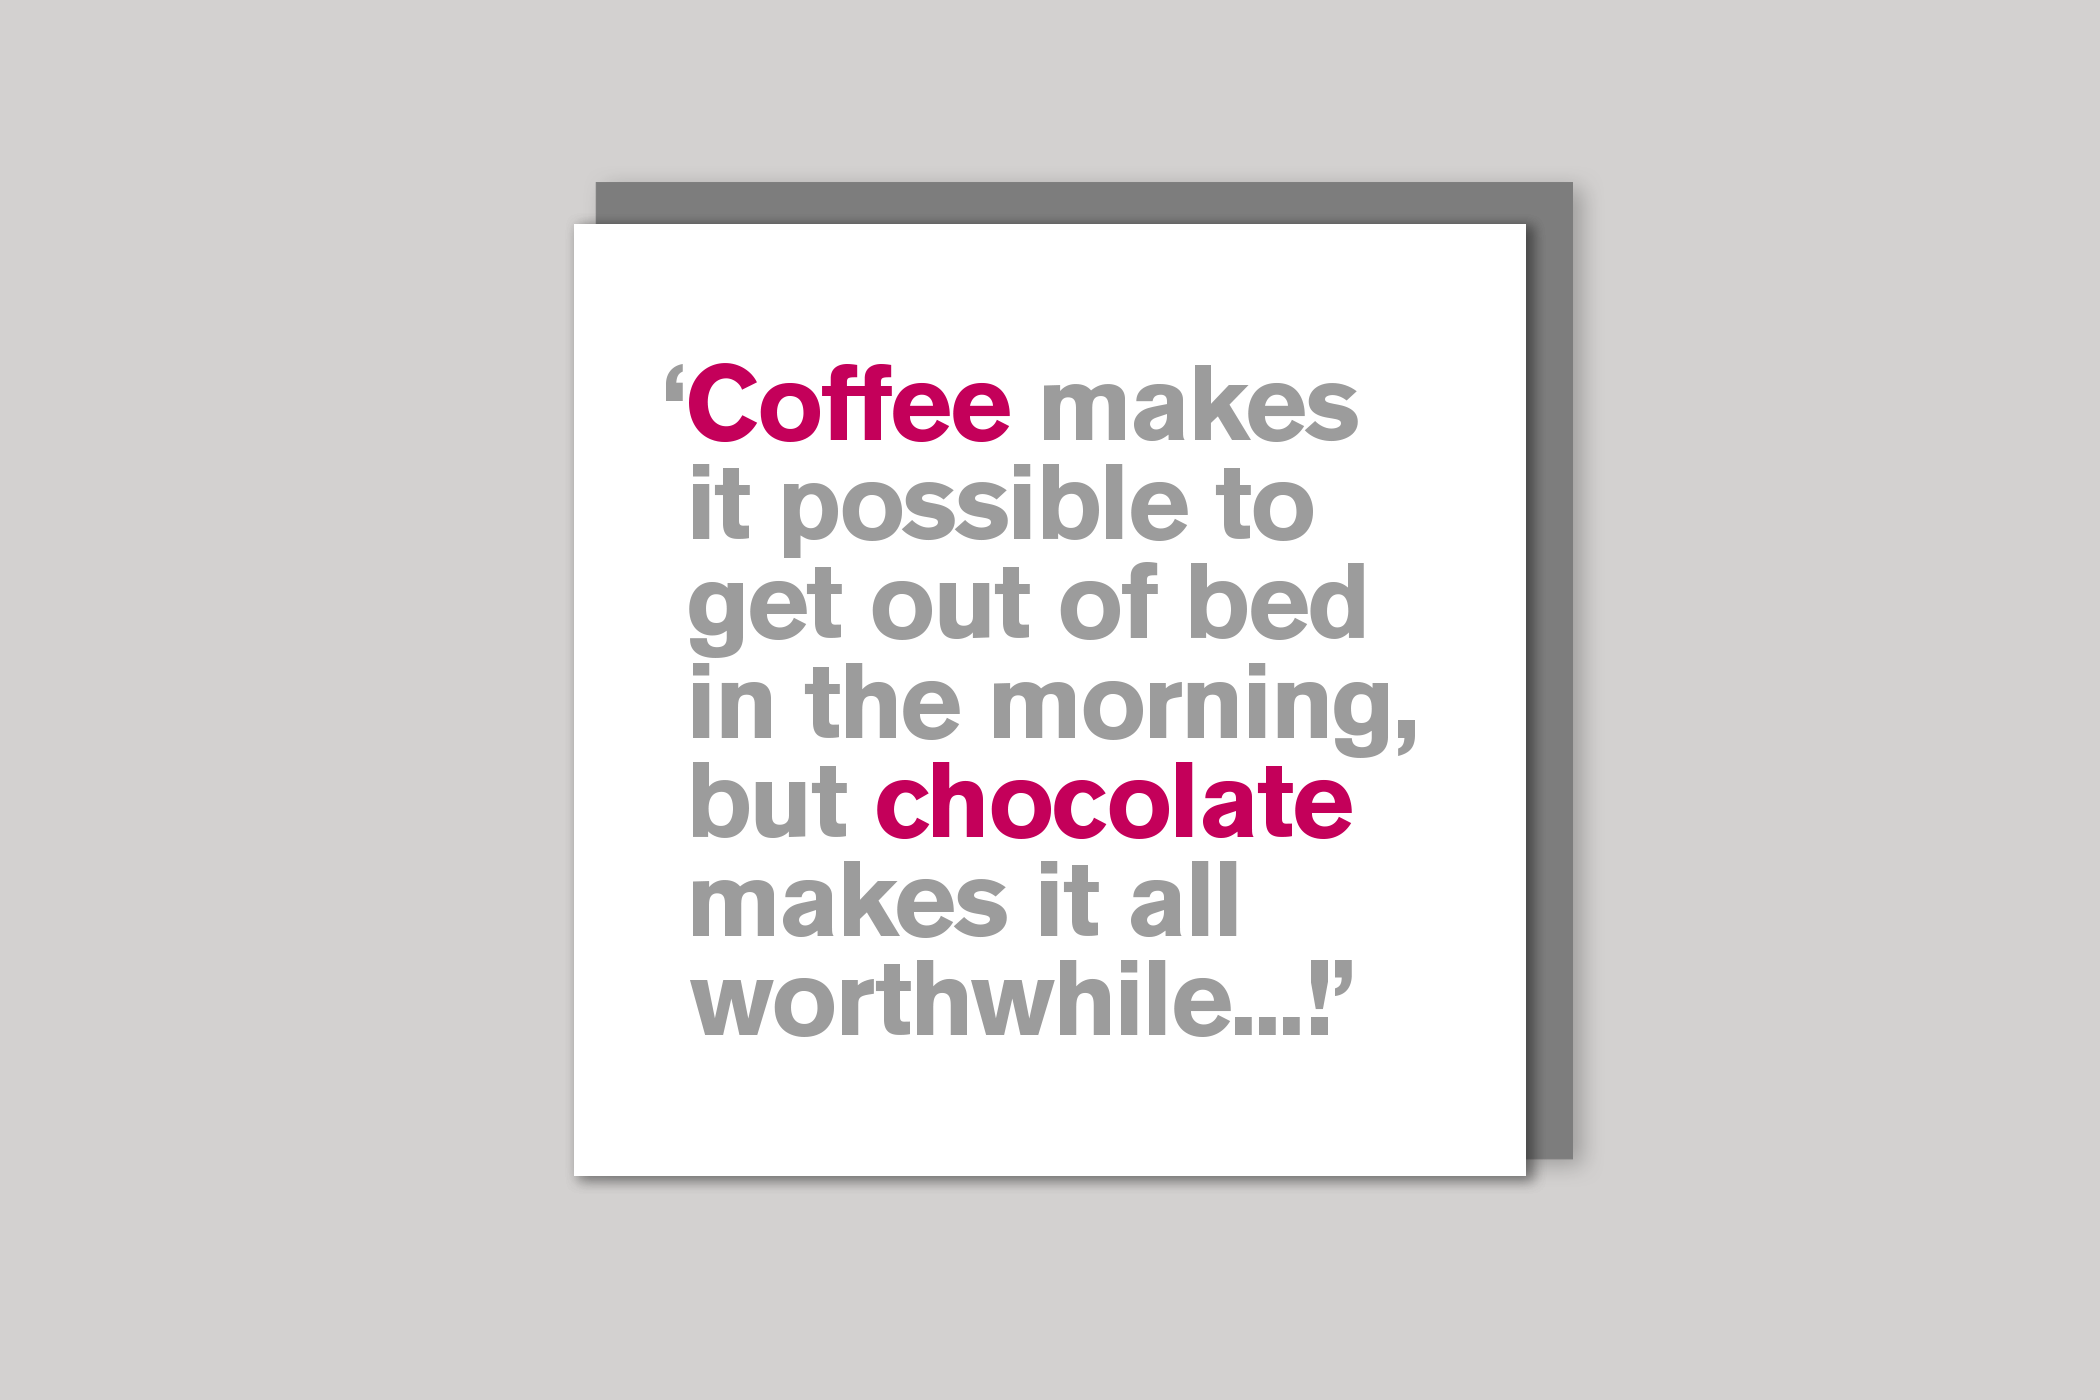 Coffee Makes it Possible from Lyric range of quotation cards by Icon, back page.